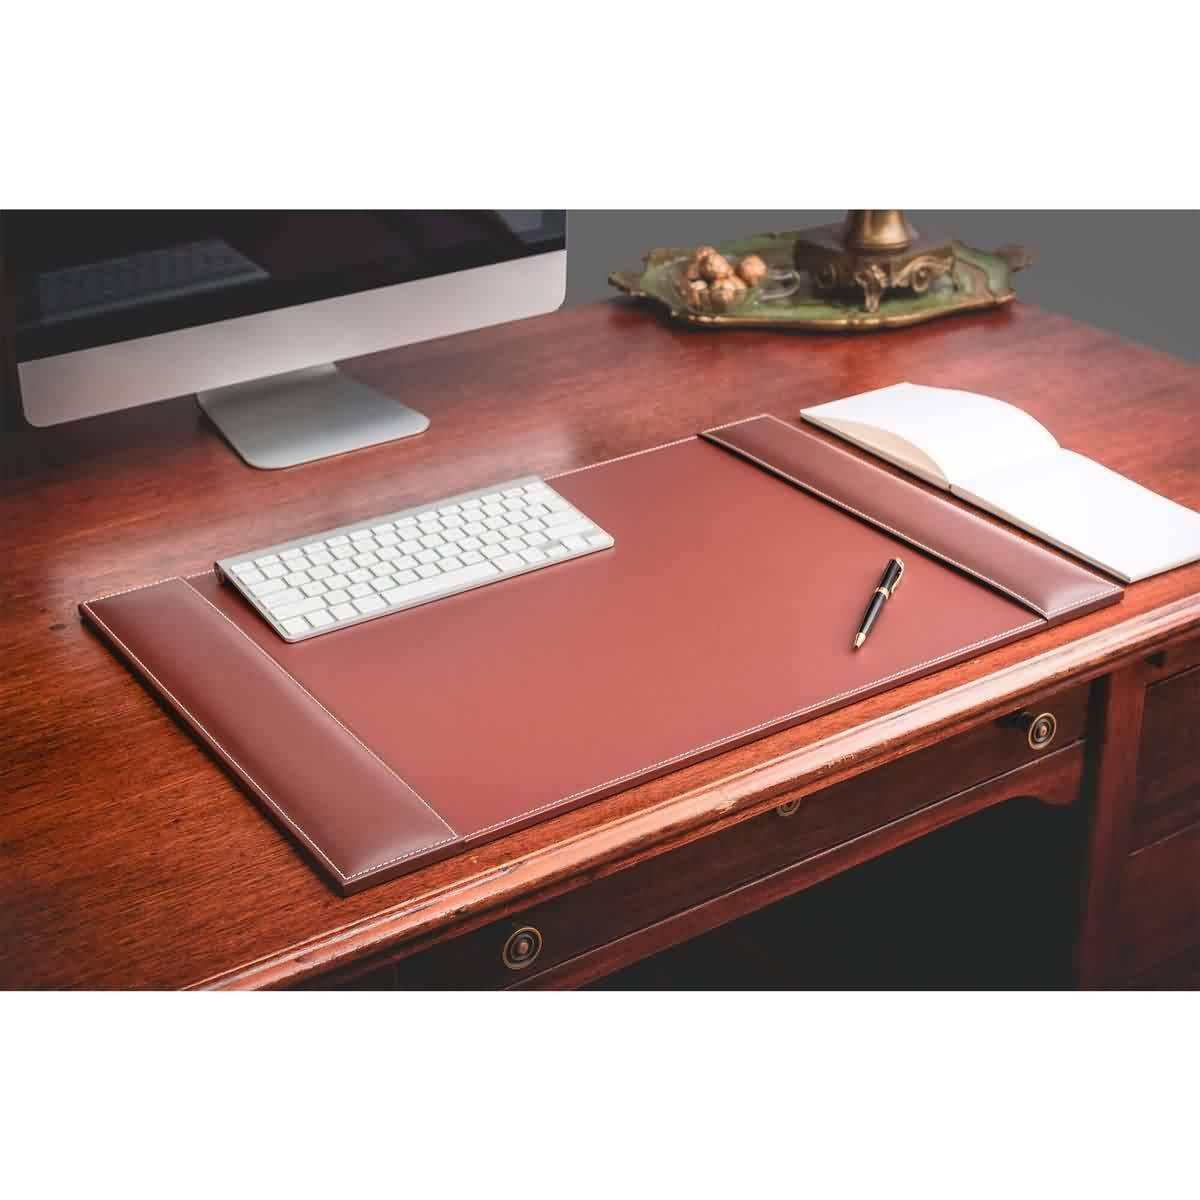 China Bonded Leather Desk Set - Personized Promotional Pu Leather ...